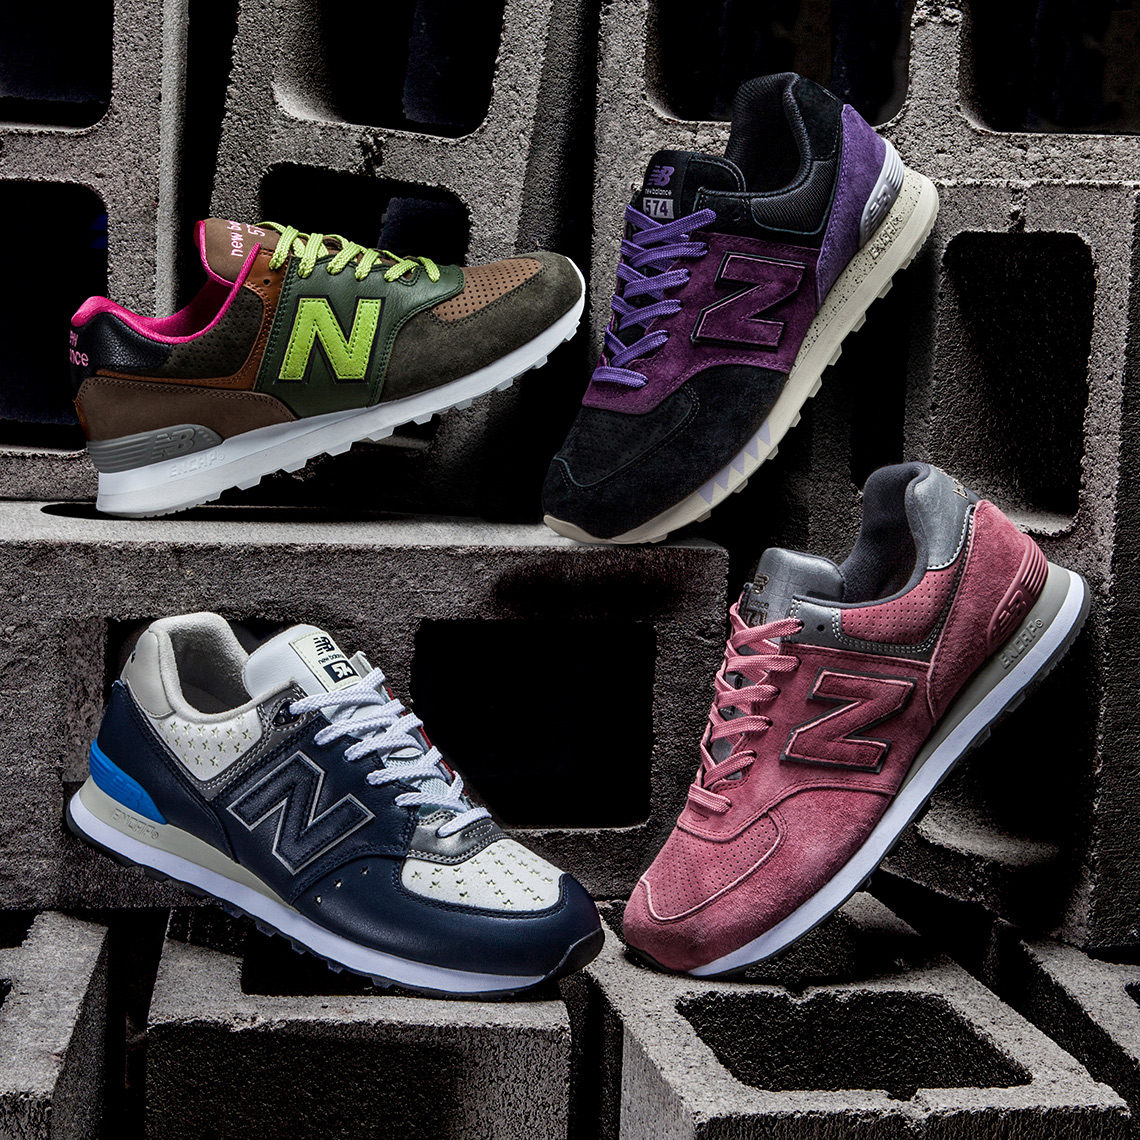 New Balance 574 "Iconic Collaboration" Collection